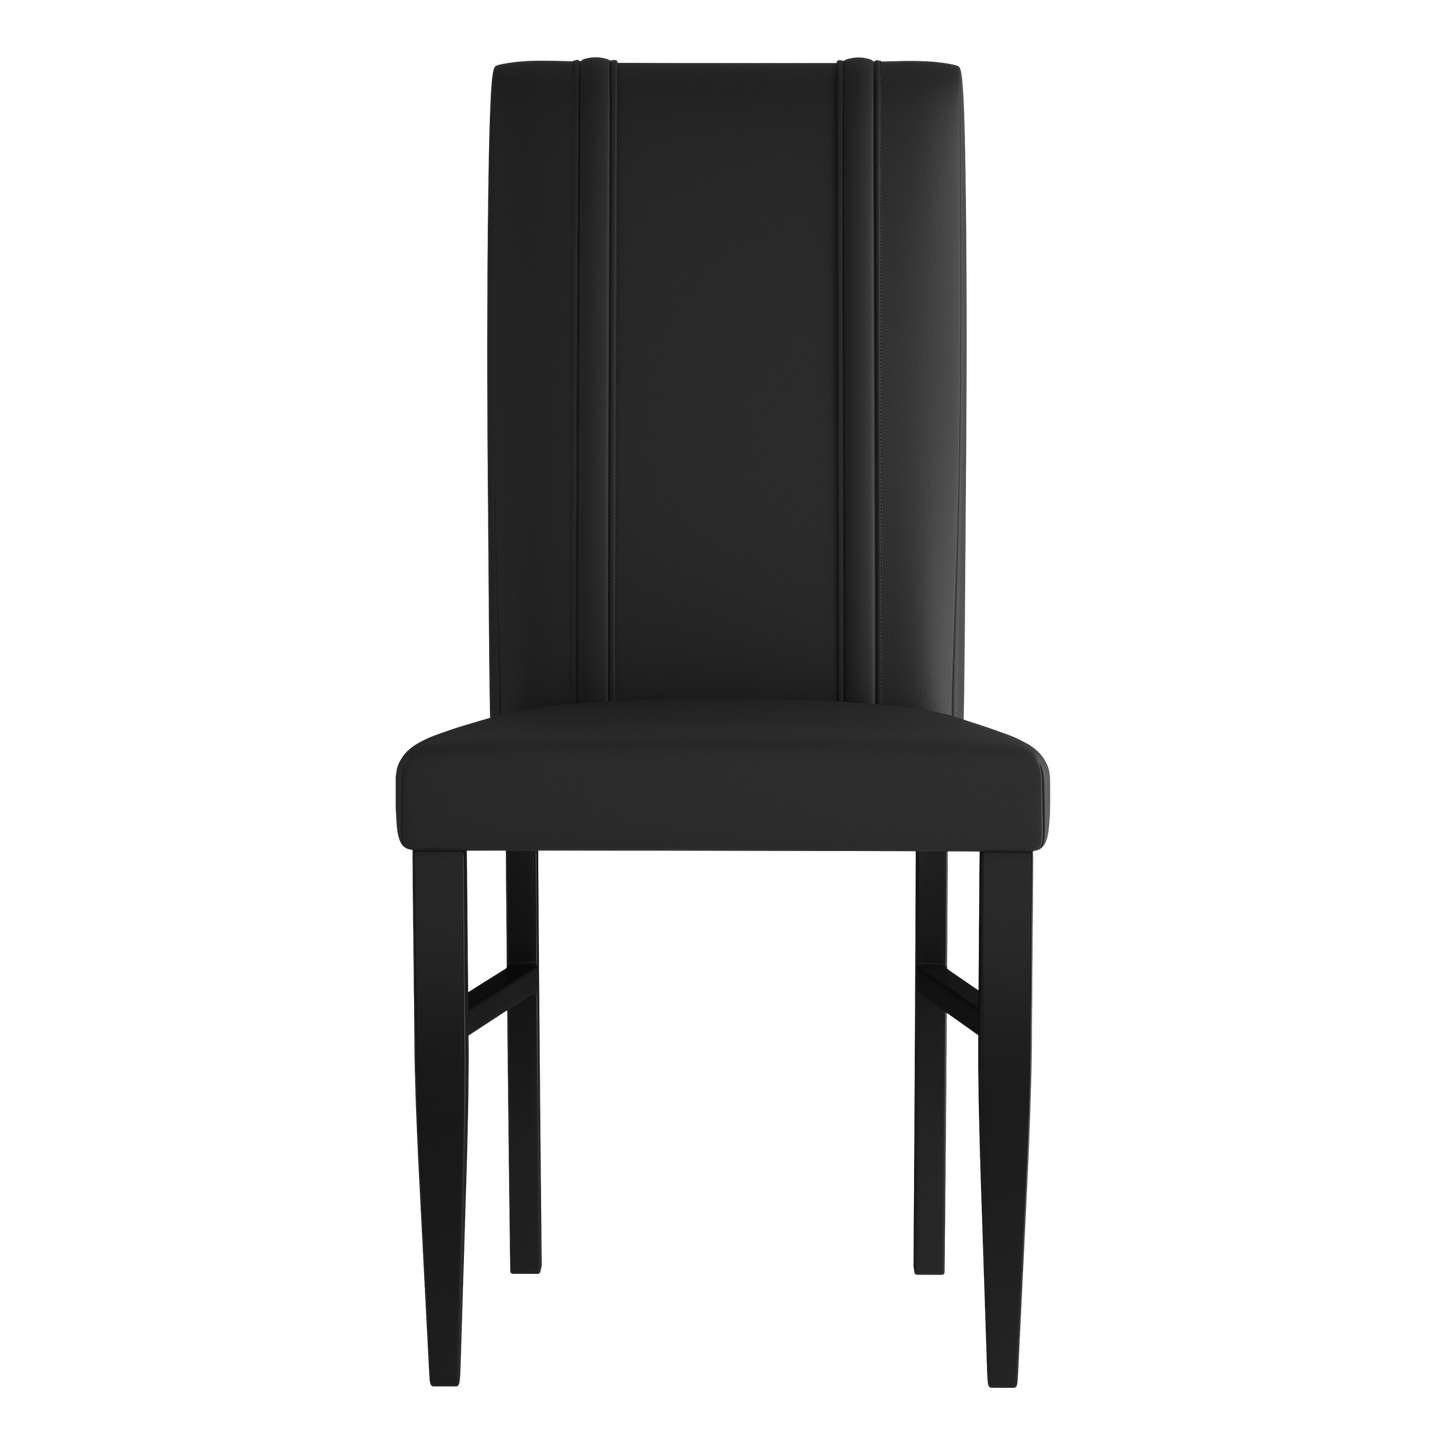 Side Chair 2000 with Ghoulish Rising Hand Halloween Logo Set of 2